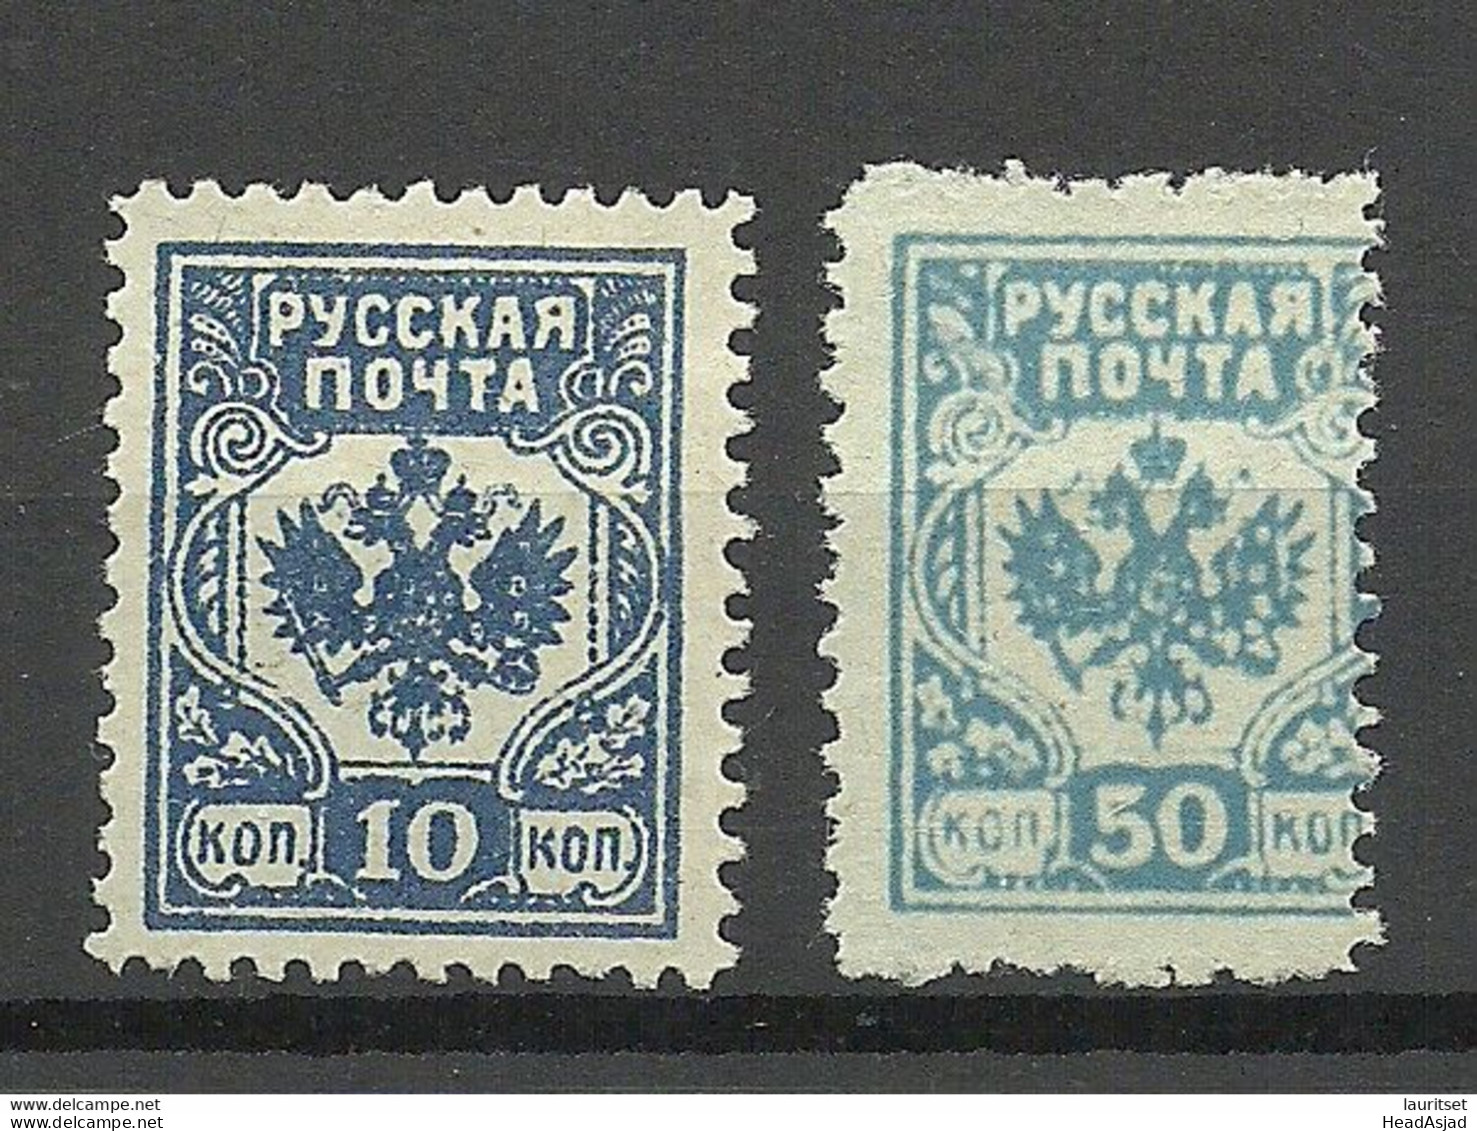 LETTLAND Latvia 1919 Westarmee Western Army General Bermondt - Avalov, 2 Stamps, Perforated Incl. Perforation Variety - West Army